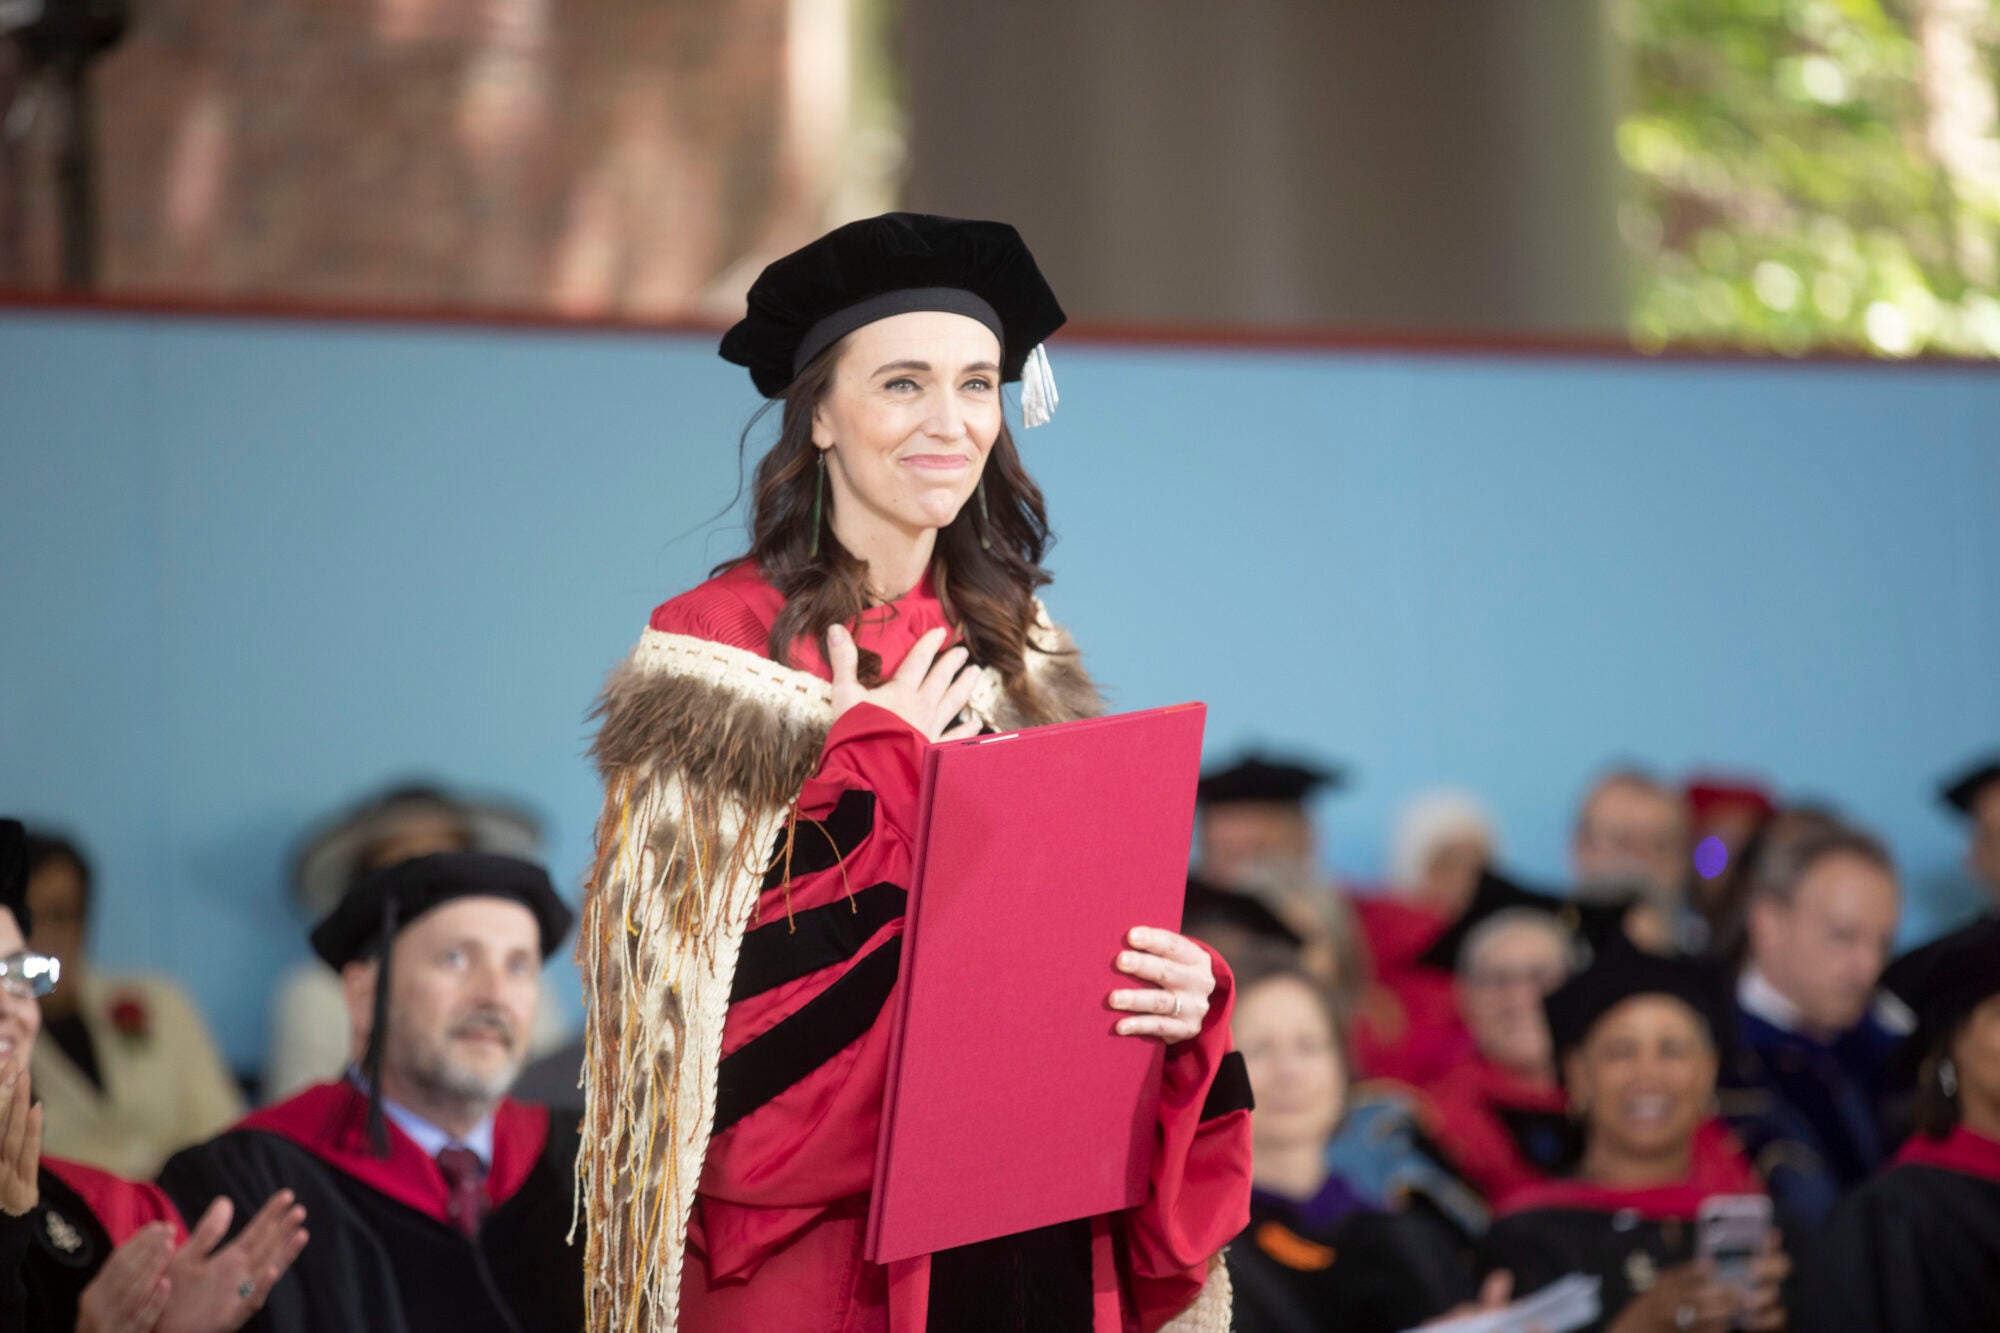 New Zealand Prime Minister Jacinda Ardern at commencement